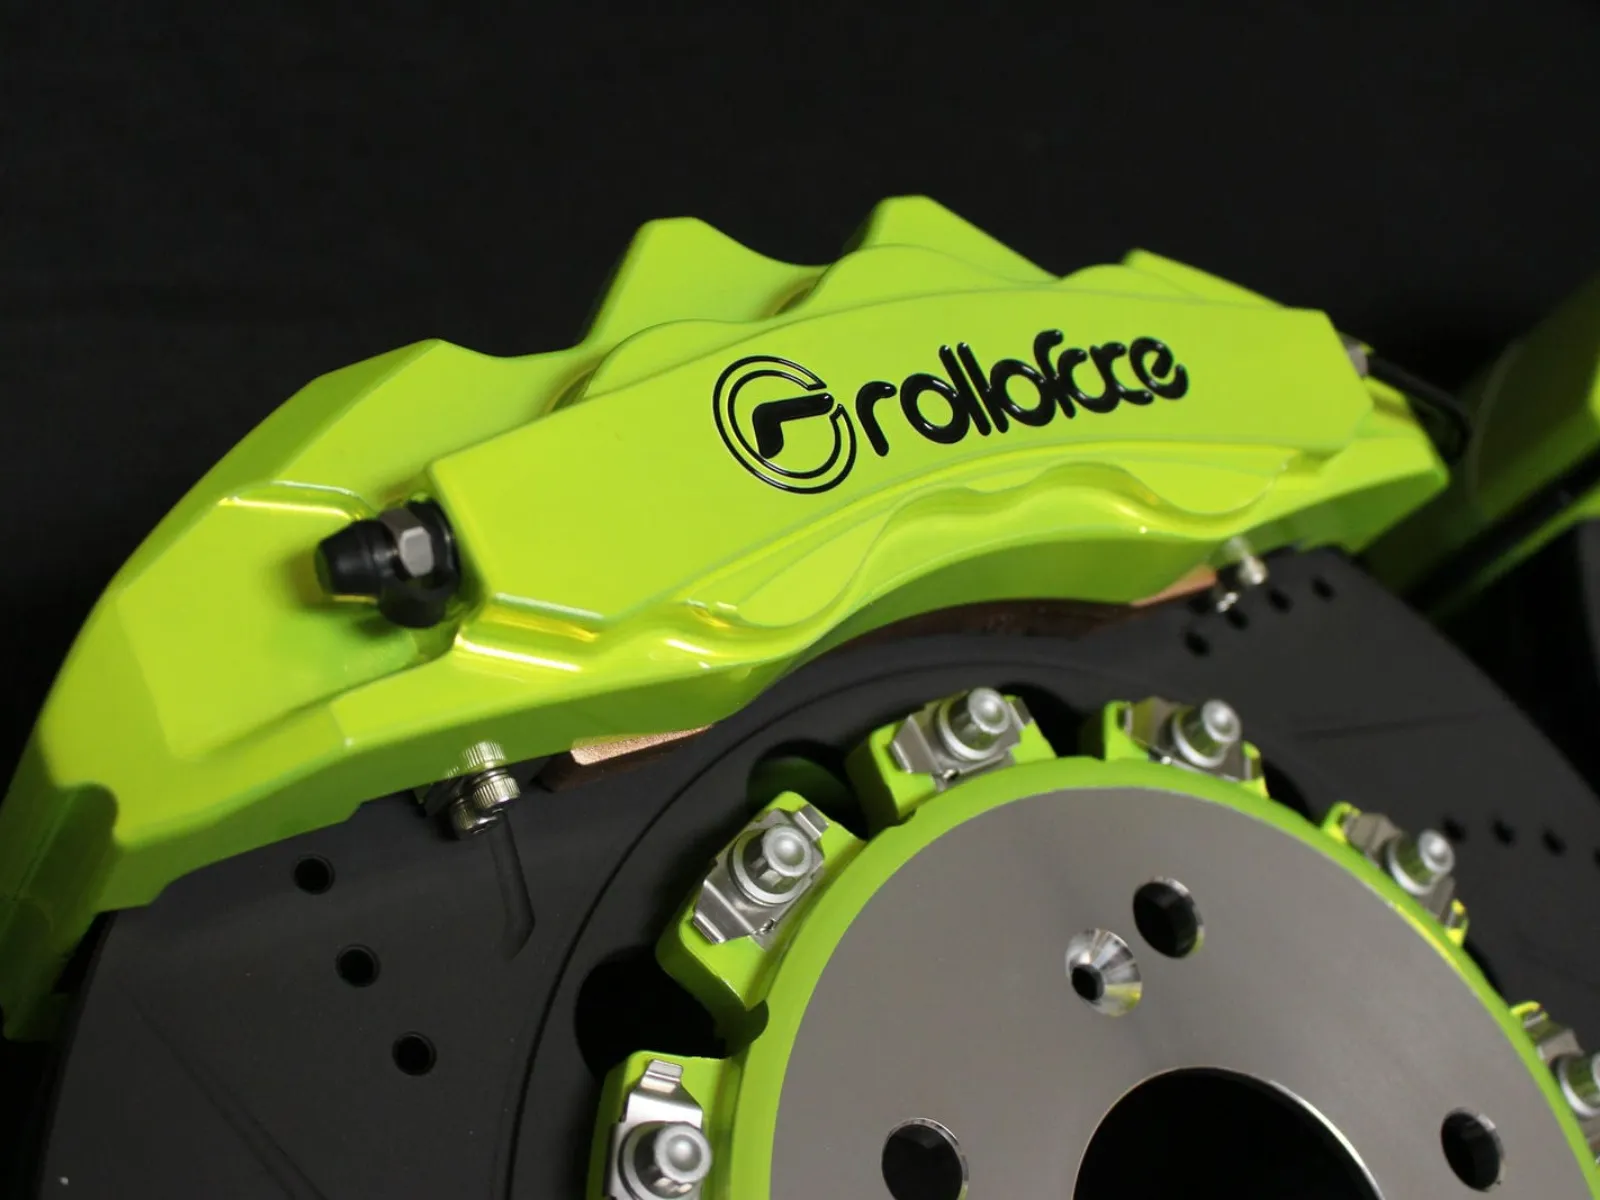 SS Series – Front forged 6 piston calipers > 2-piece 13″ / 13.5" / 14" / 14.4"  floating curved vanes rotors